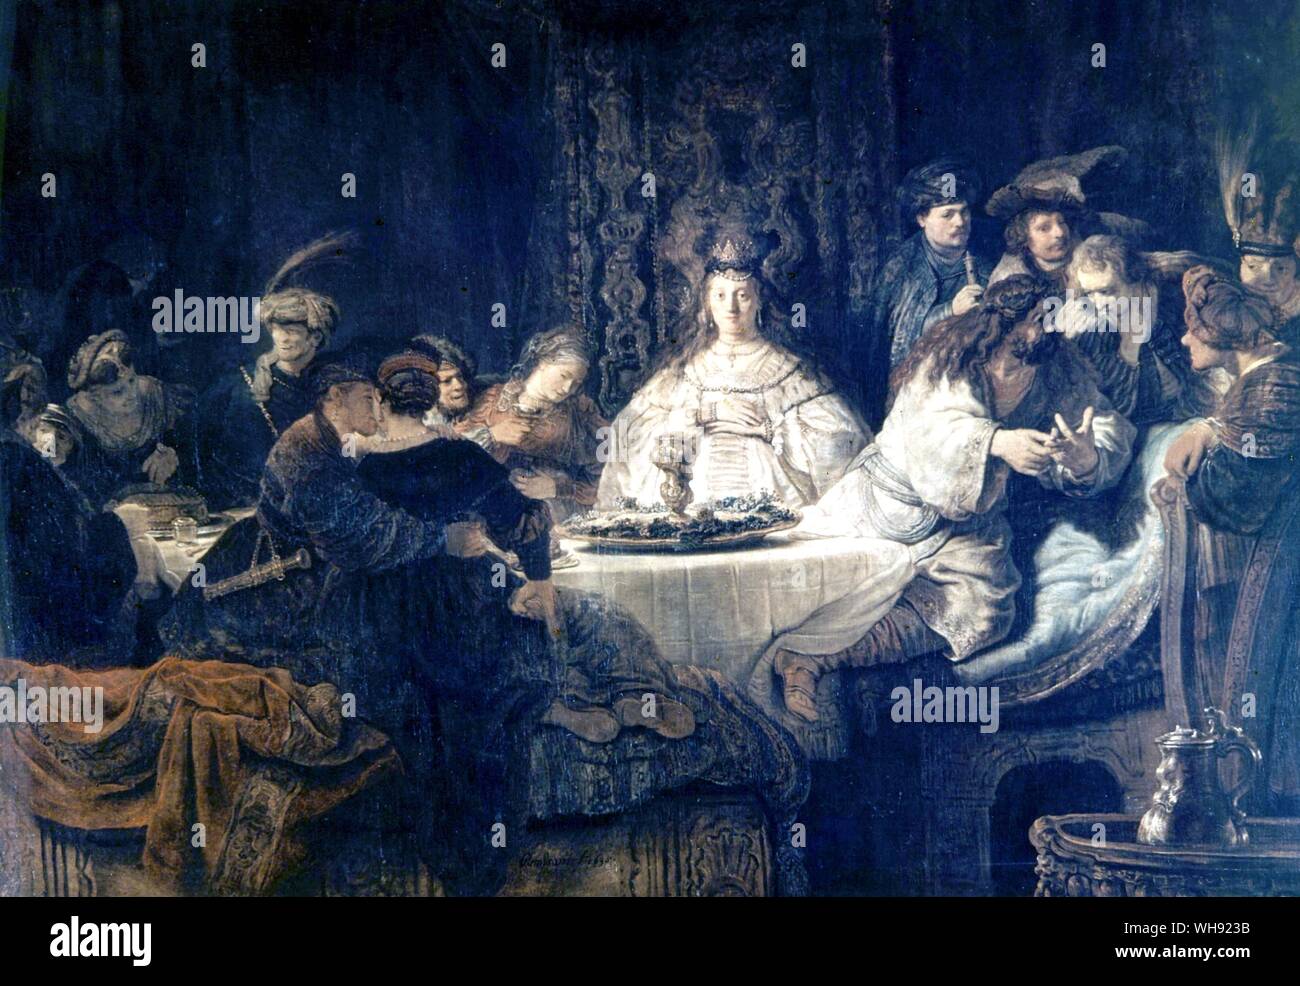 Samson's Wedding. Samson Proposing the Riddle at the Wedding Feast, 1638 . by Rembrandt. in Deutsch Fototek Dresden. Rembrandt Harmenszoon van Rijn (July 15, 1606 - October 4, 1669) is generally considered one of the greatest painters in European art history and the most important in Dutch history.. Stock Photo